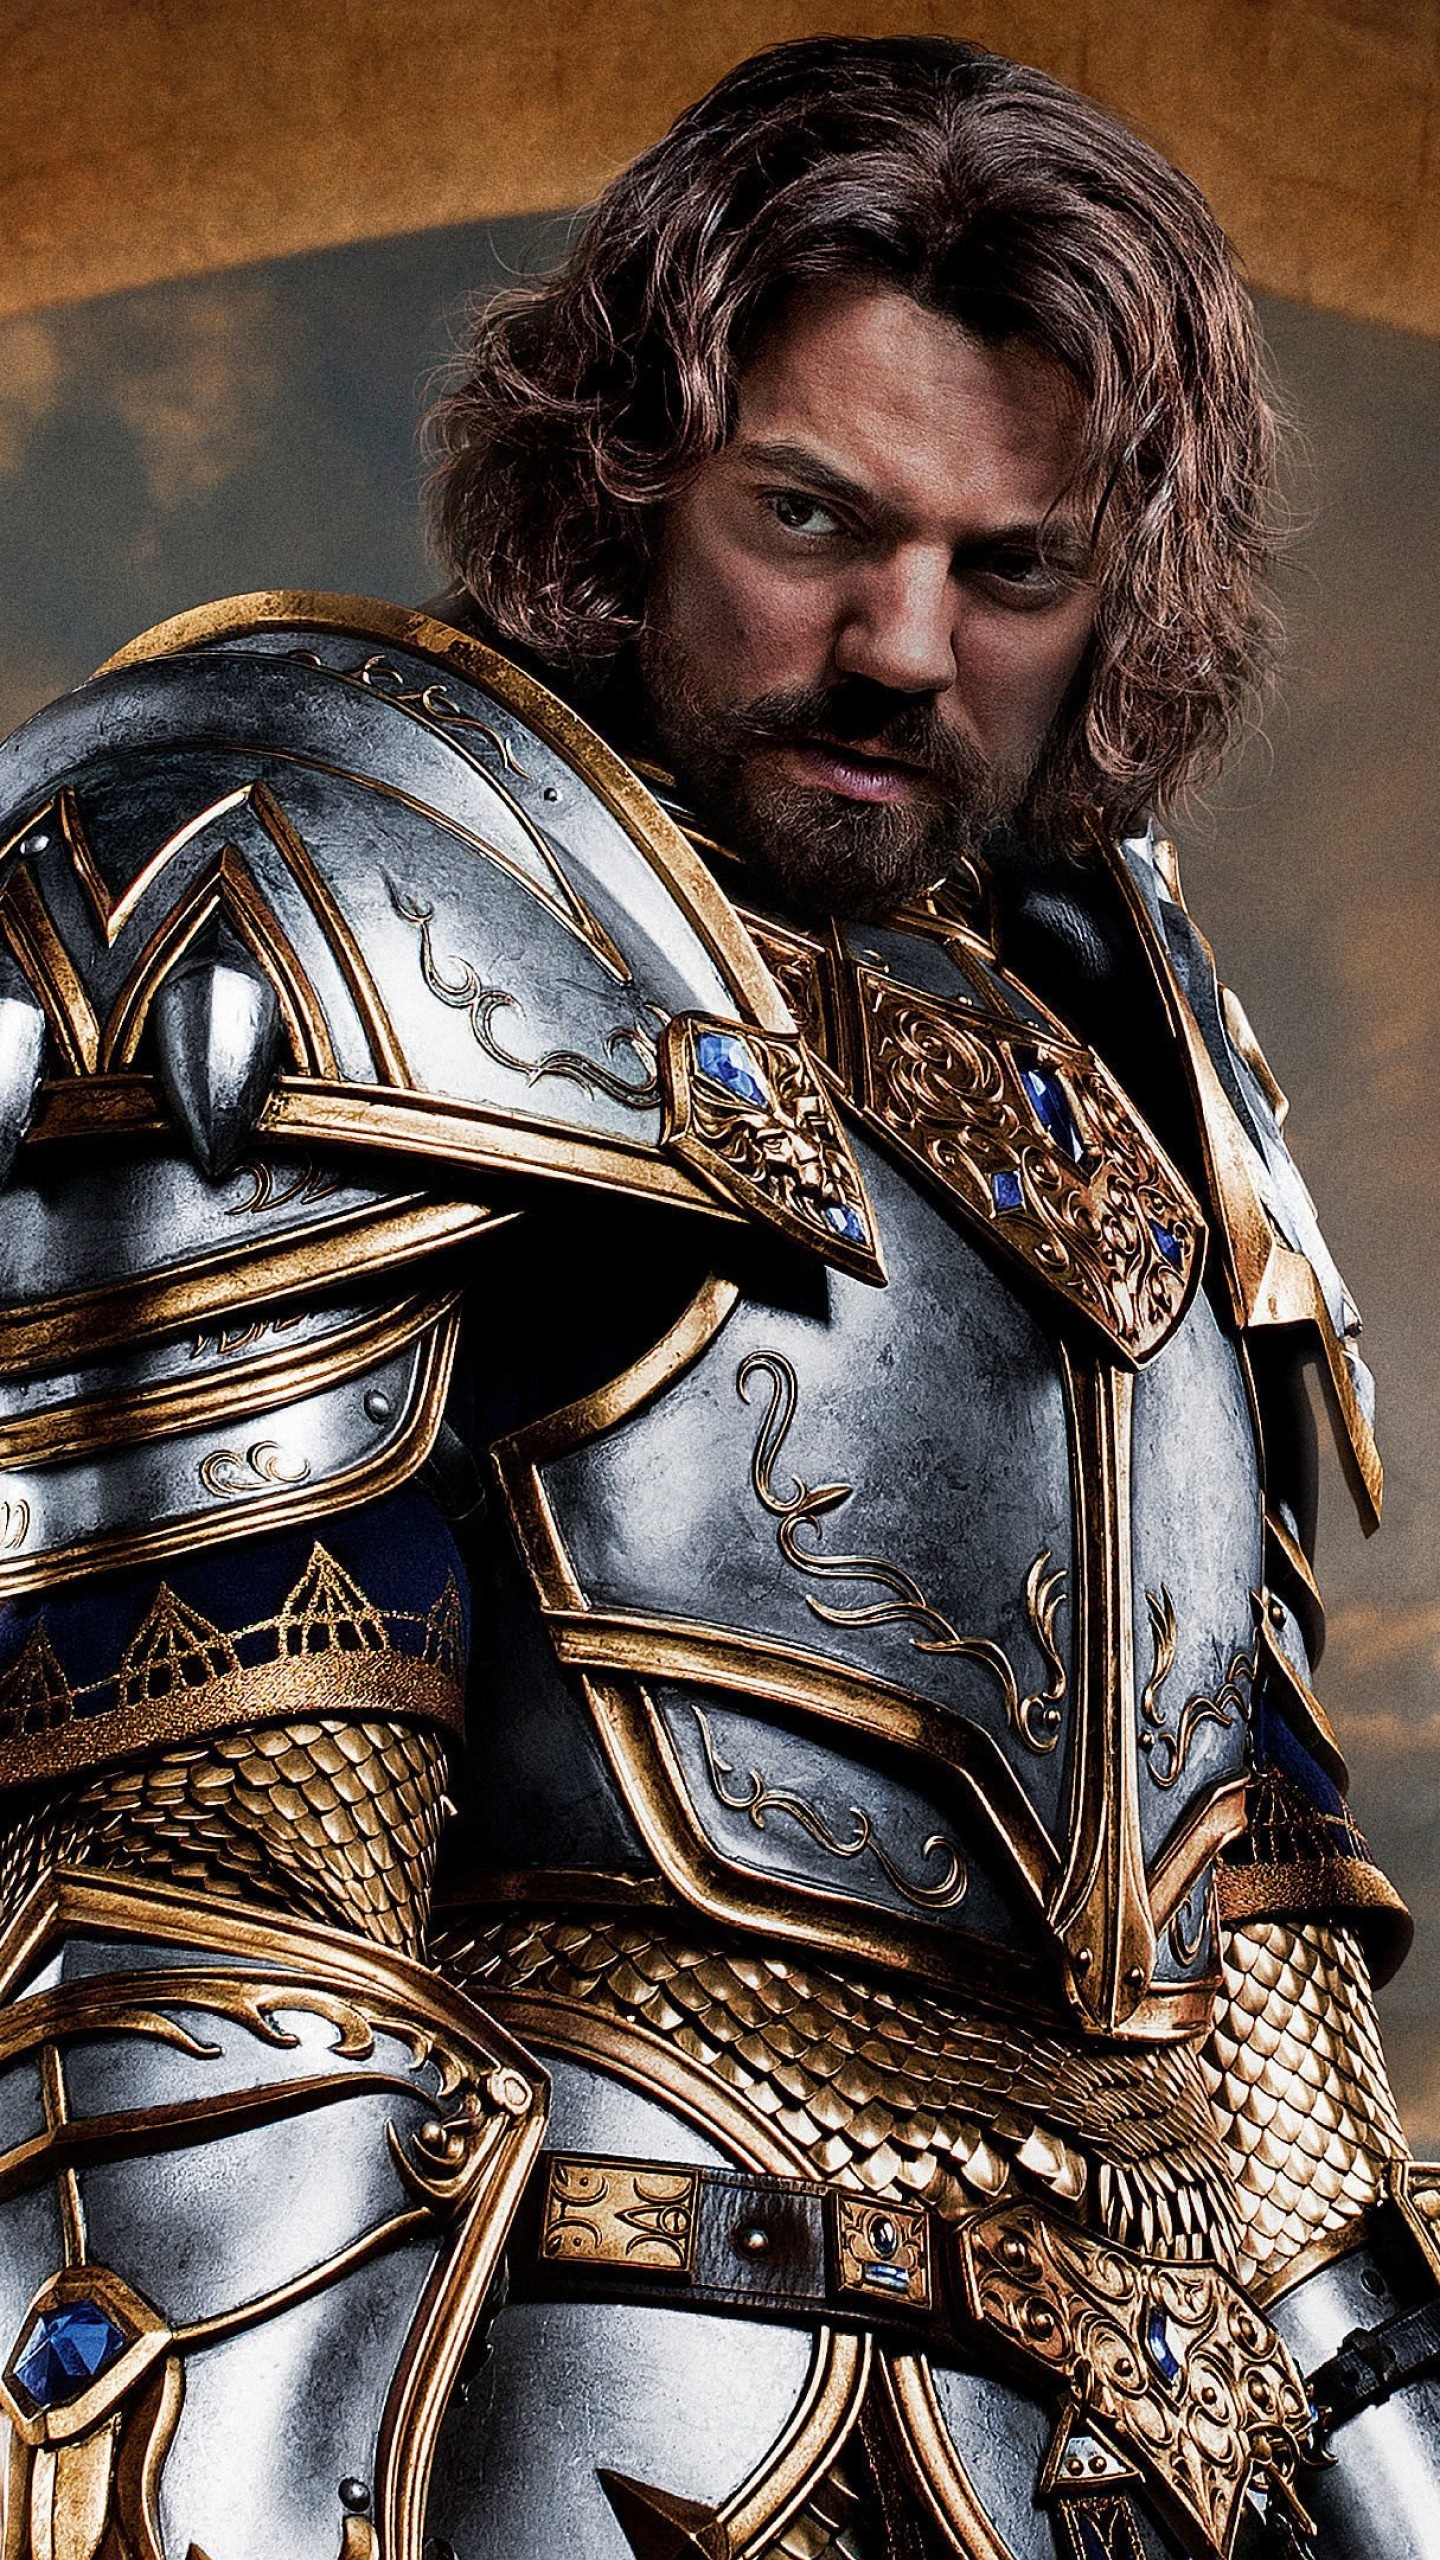 Warcraft (Movie): Dominic Cooper as King Llane Wrynn, the ruler of the Kingdom of Azeroth. 1440x2560 HD Background.